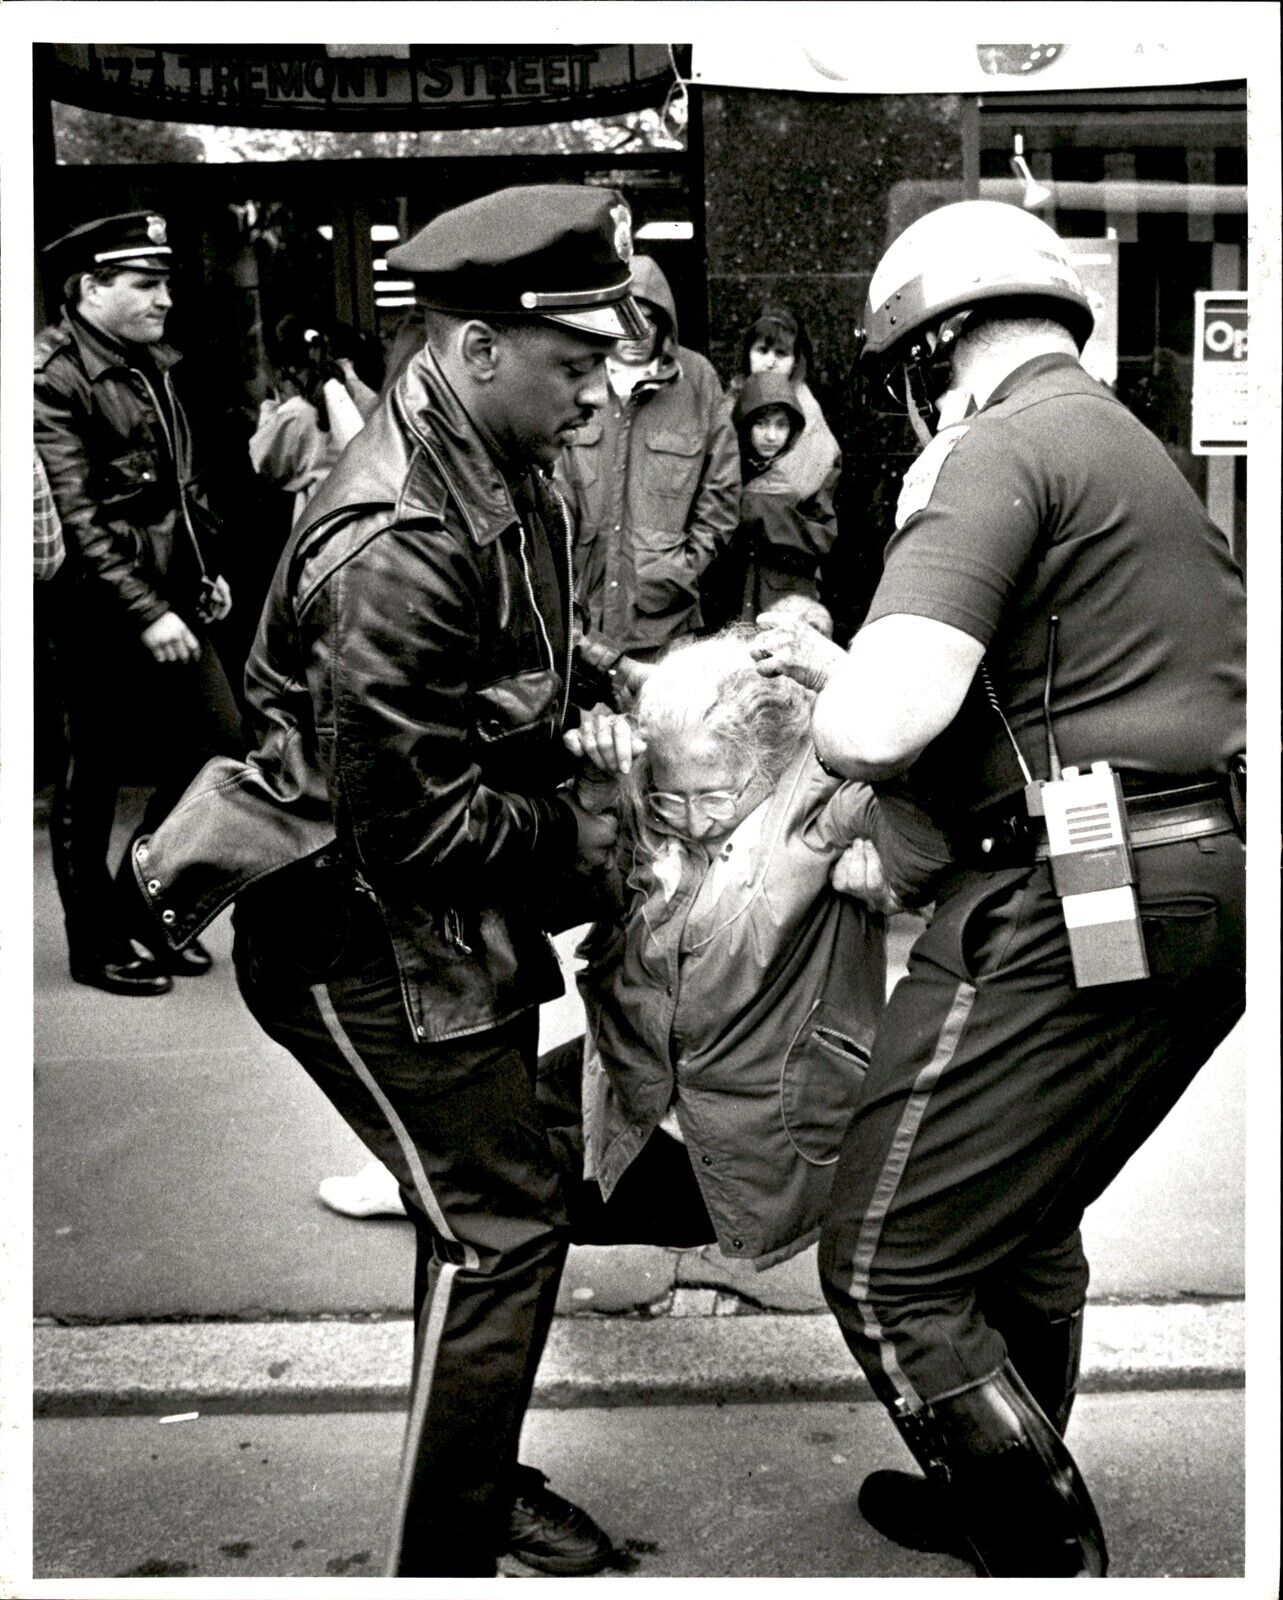 LD373 1990 Orig Robert Eng Photo OPERATION RESCUE ABORTION PROTEST ARREST BOSTON